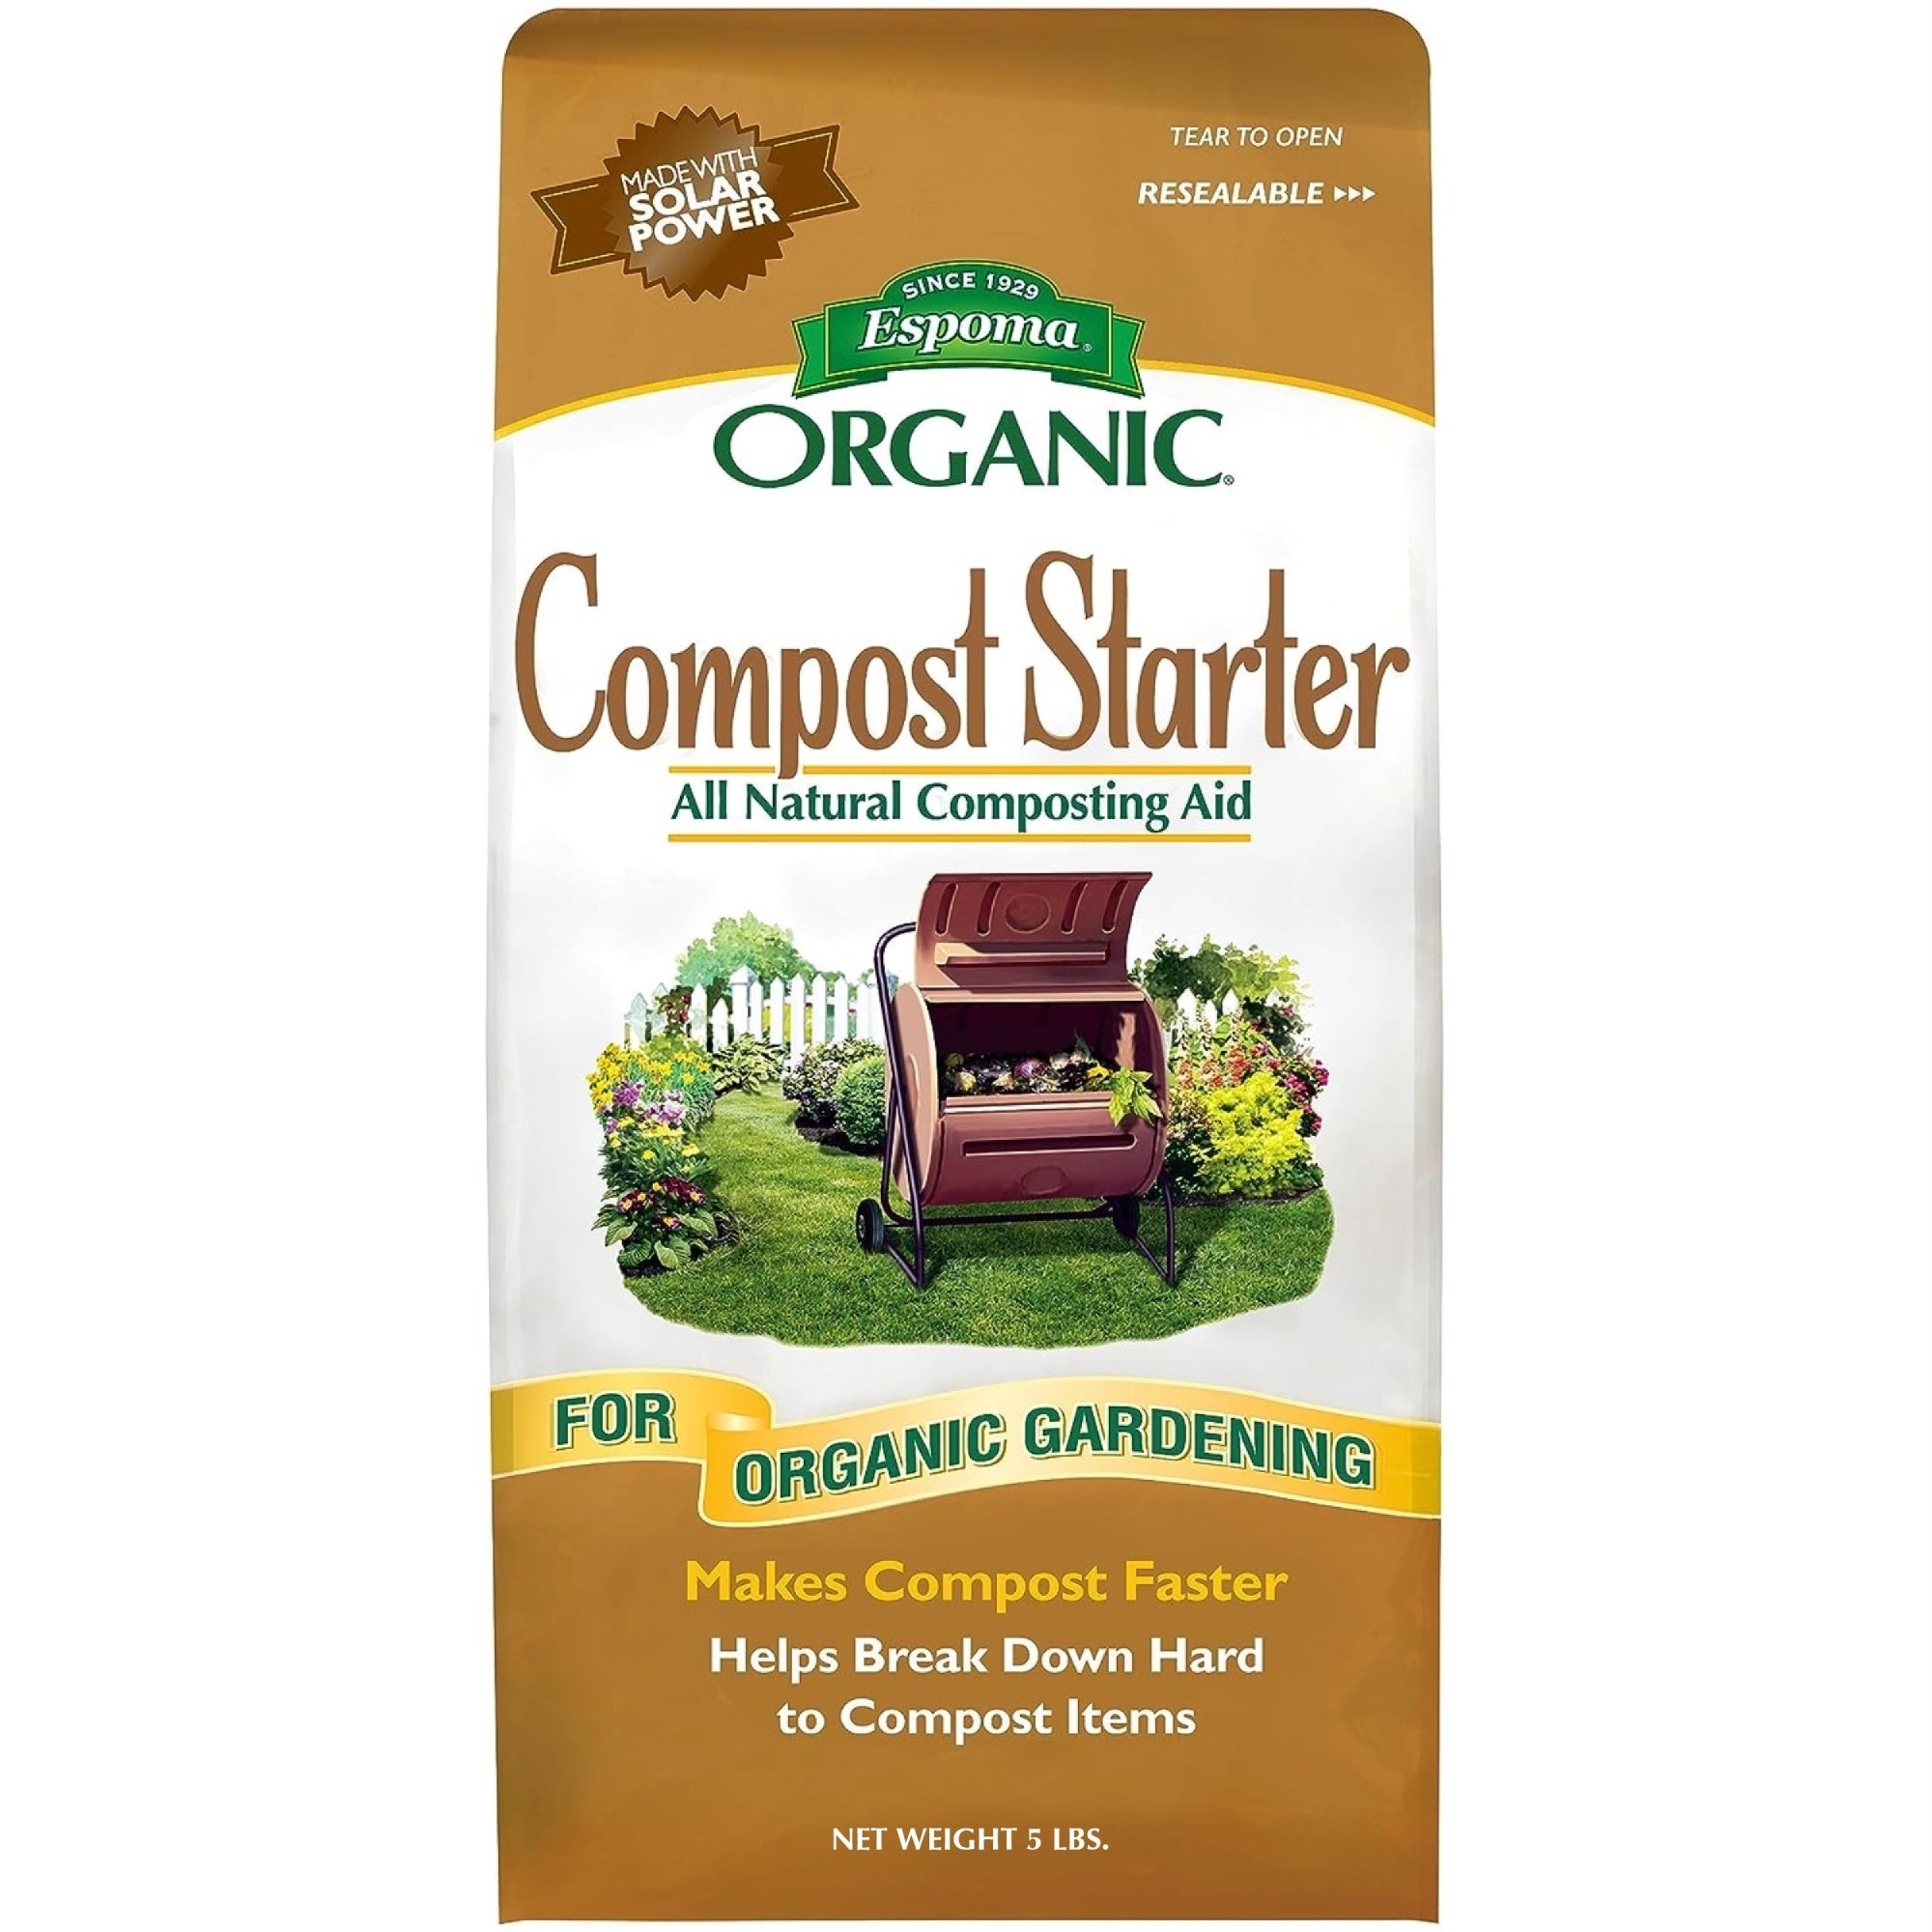 Espoma Organic All Natural Compost Starter Composting Aid, for Organic Gardening, Makes Composting Faster, 4 lb Bag